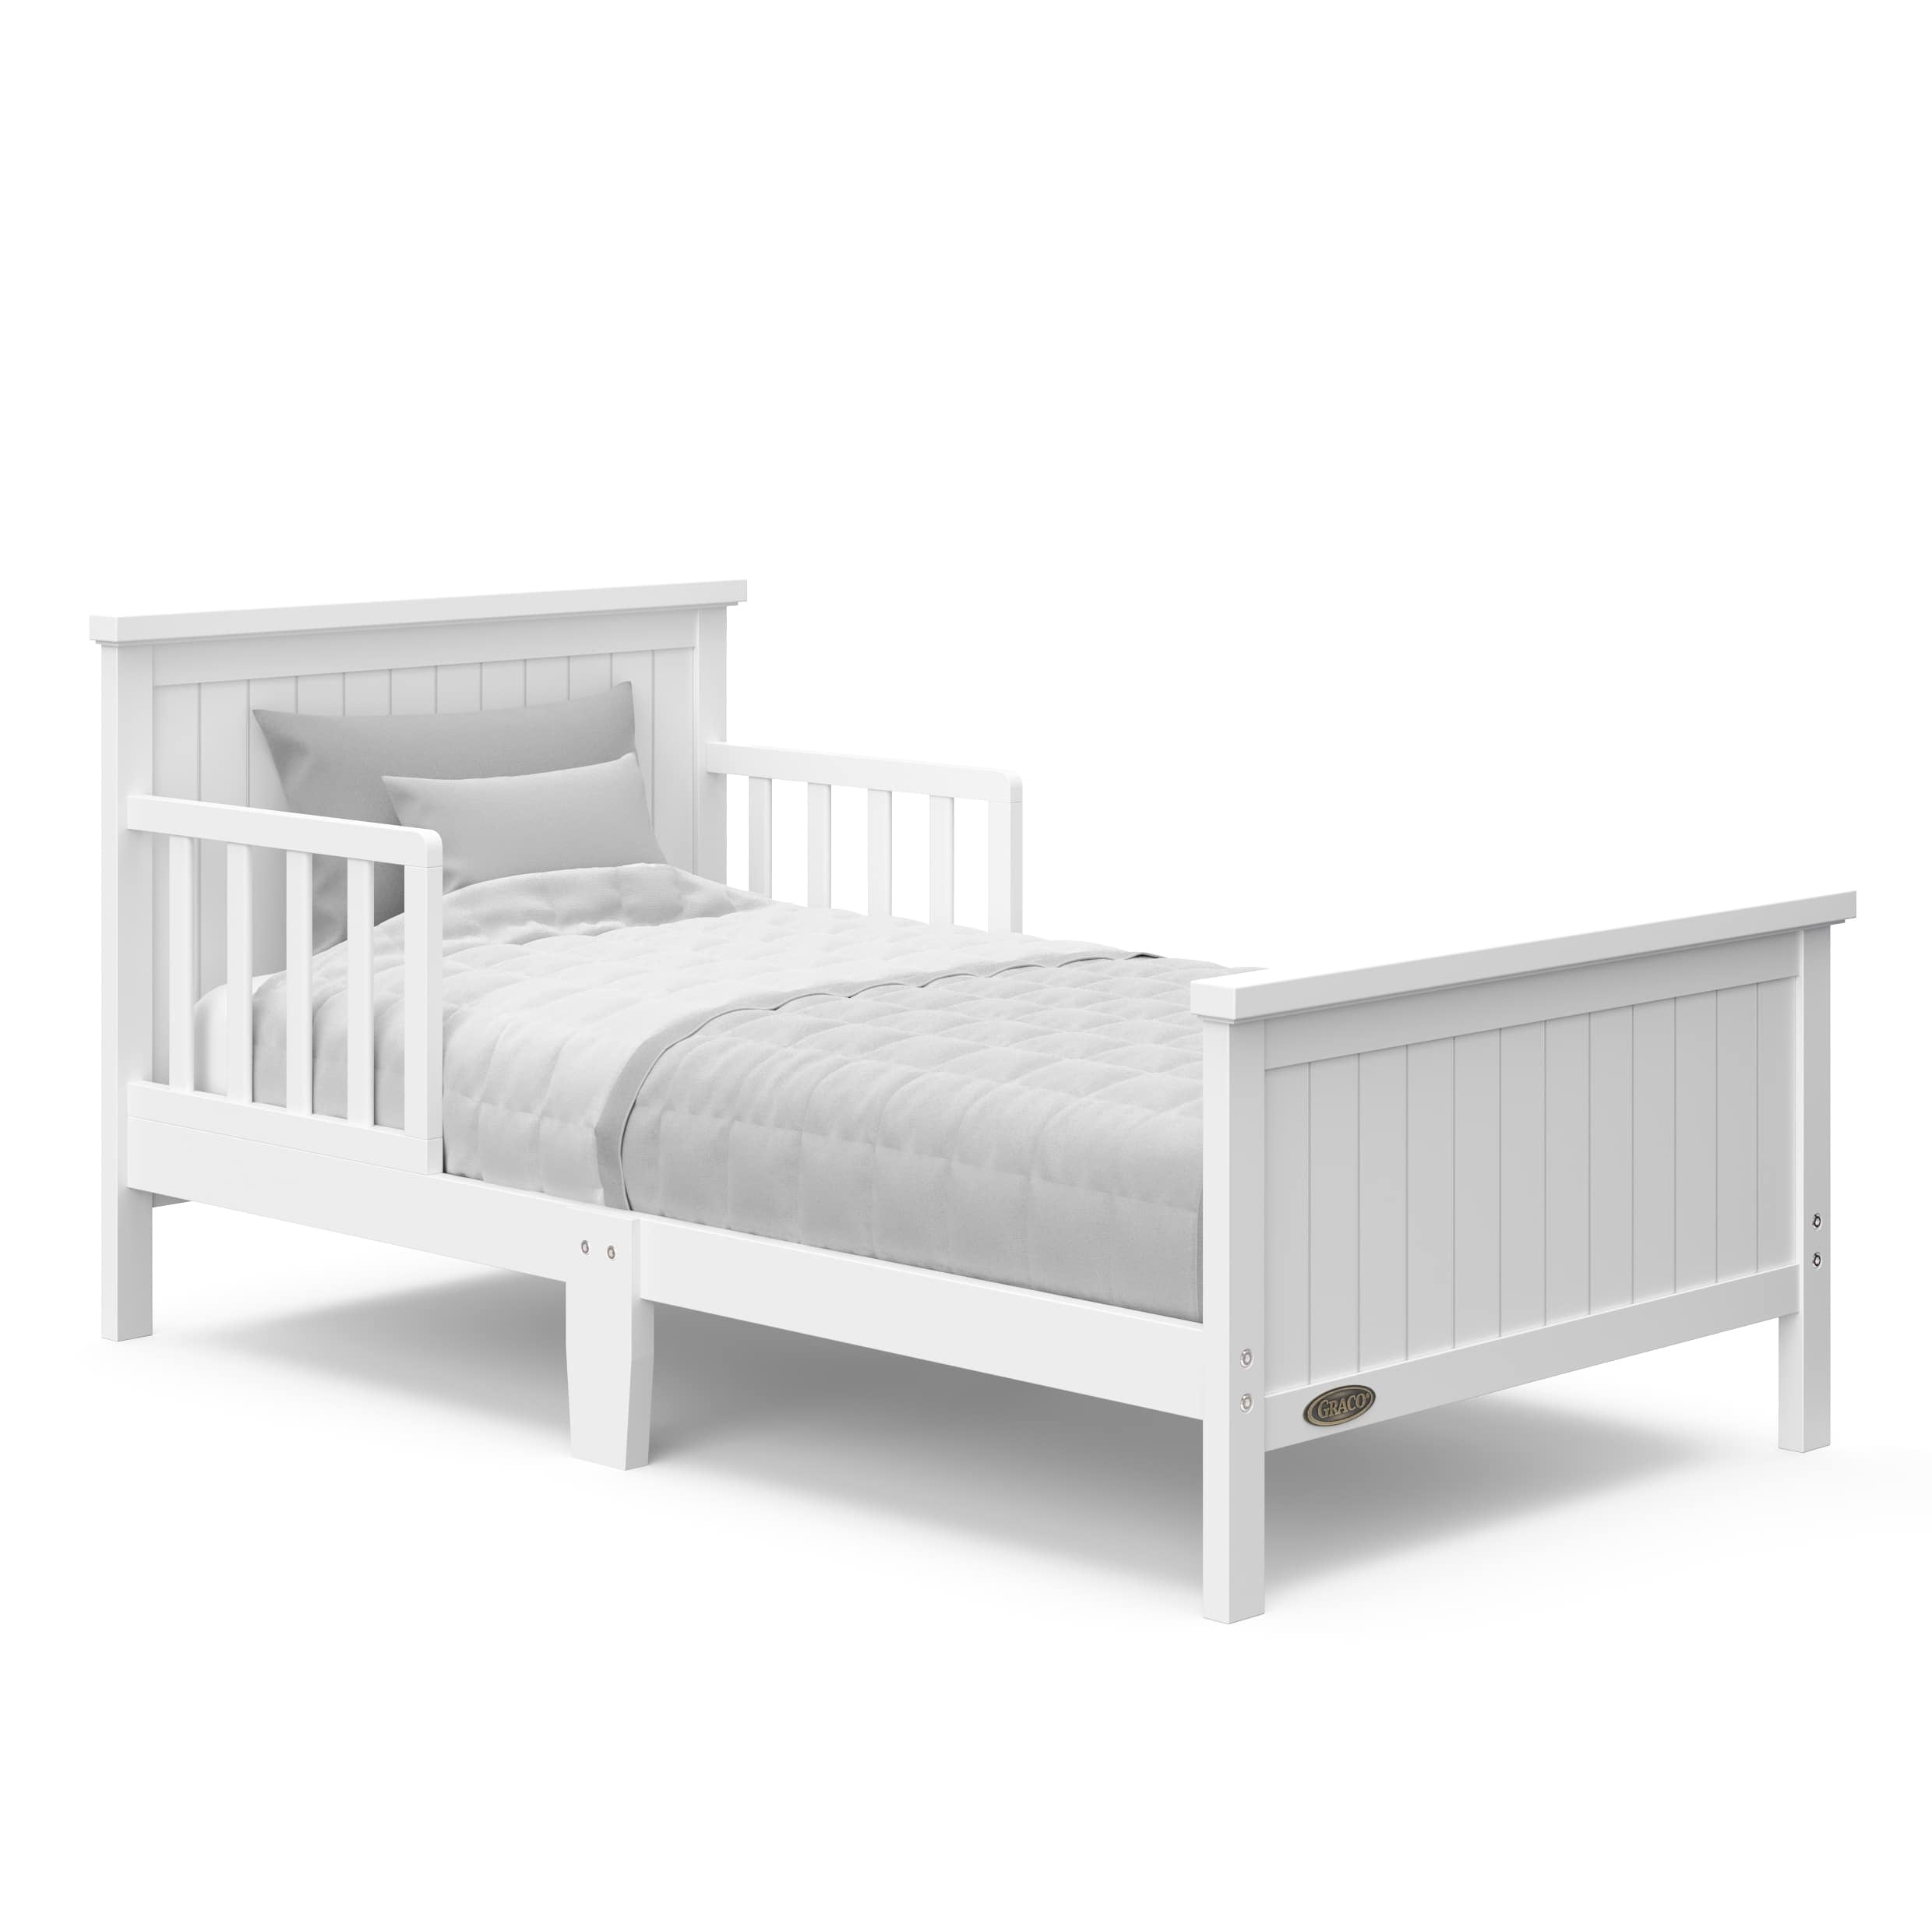 Grey Delta Children Epic Wood Toddler Bed with Attached Guardrails 